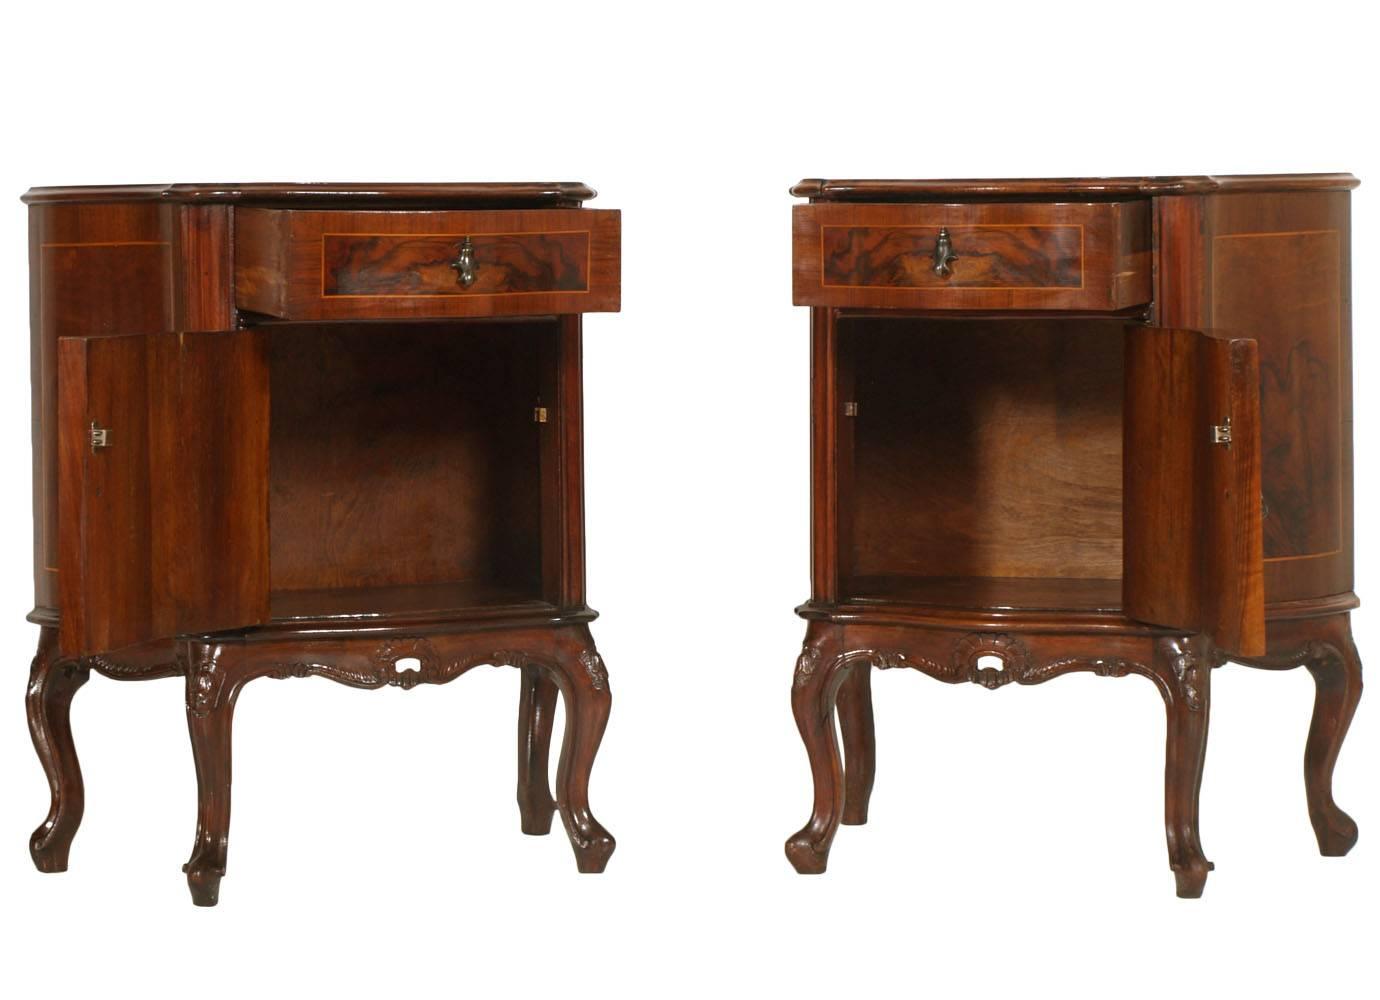 Early 20th century Venetian baroque pair of spectacular and refined nightsatnds, in hand-carved walnut and burl walnut fillet inlay , period 1930s, by Testolini & Salviati Jesorum; polished  with wax.
Measure in cm H 76 W 55 D 36.





About